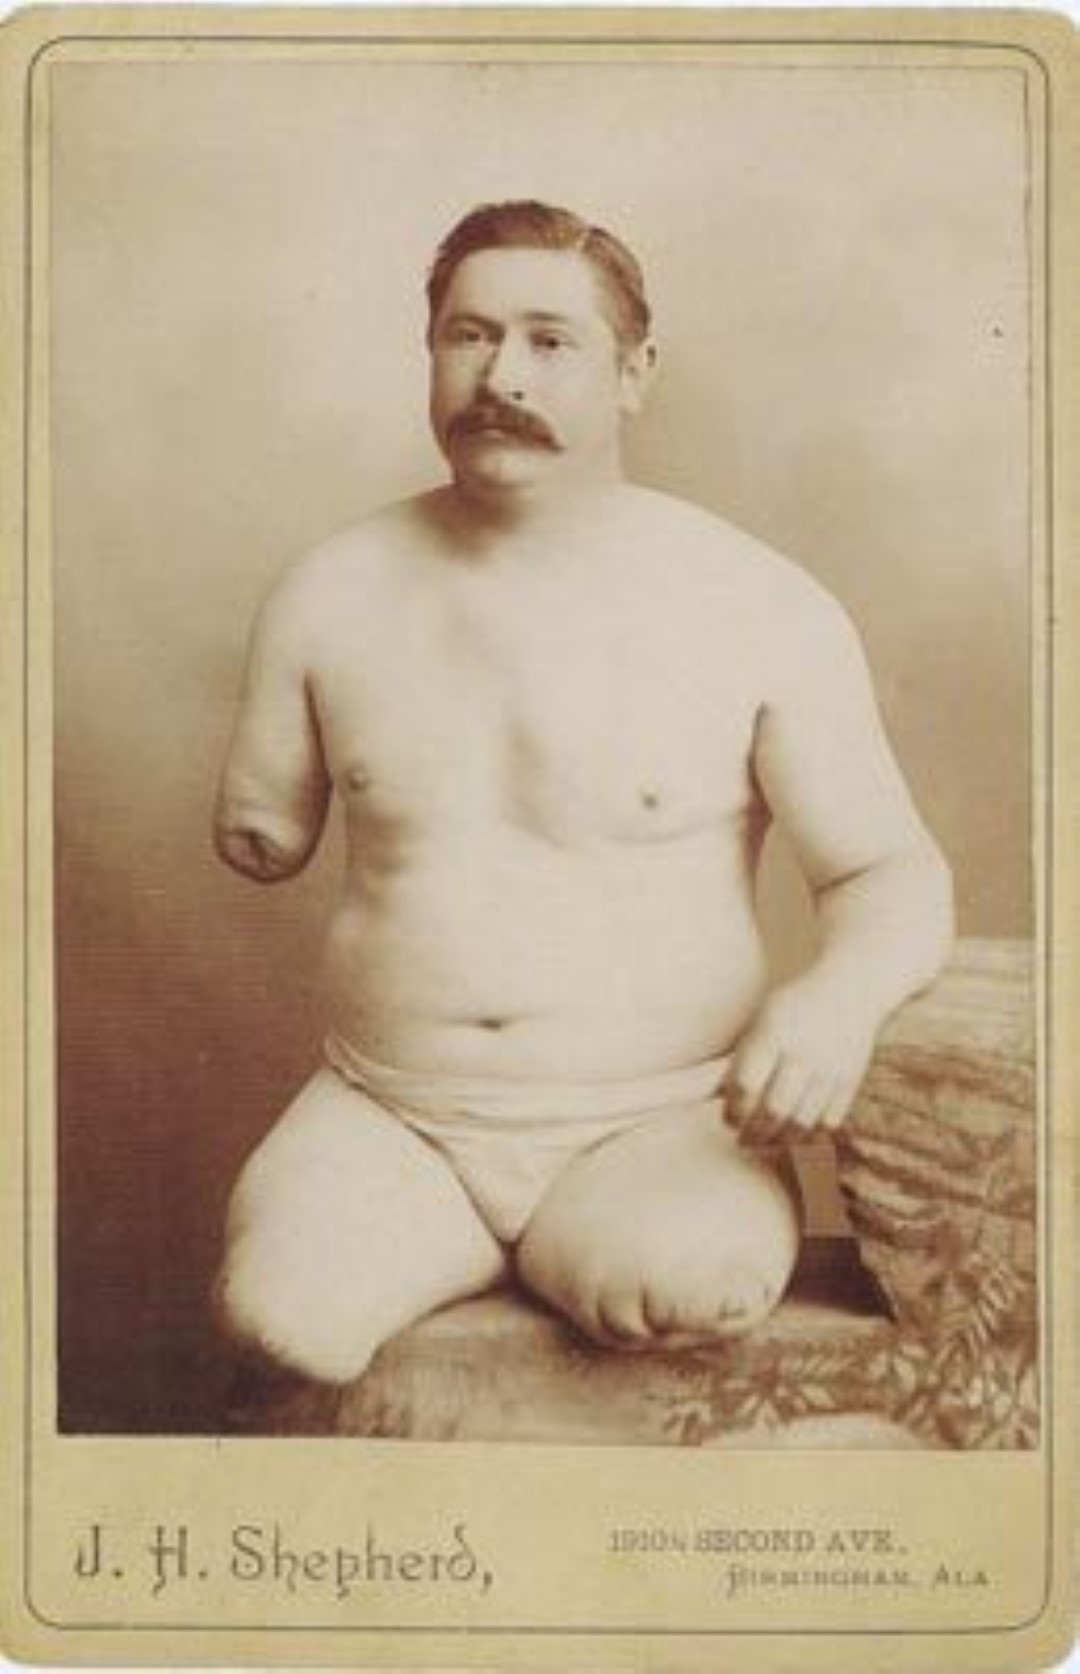 Triple Amputee - The thirty-two year old man pictured here had his legs and one arms crushed by a railroad car which was transporting building materials. He had to have all three limbs amputated. His was the second successful triple amputation in the United States.